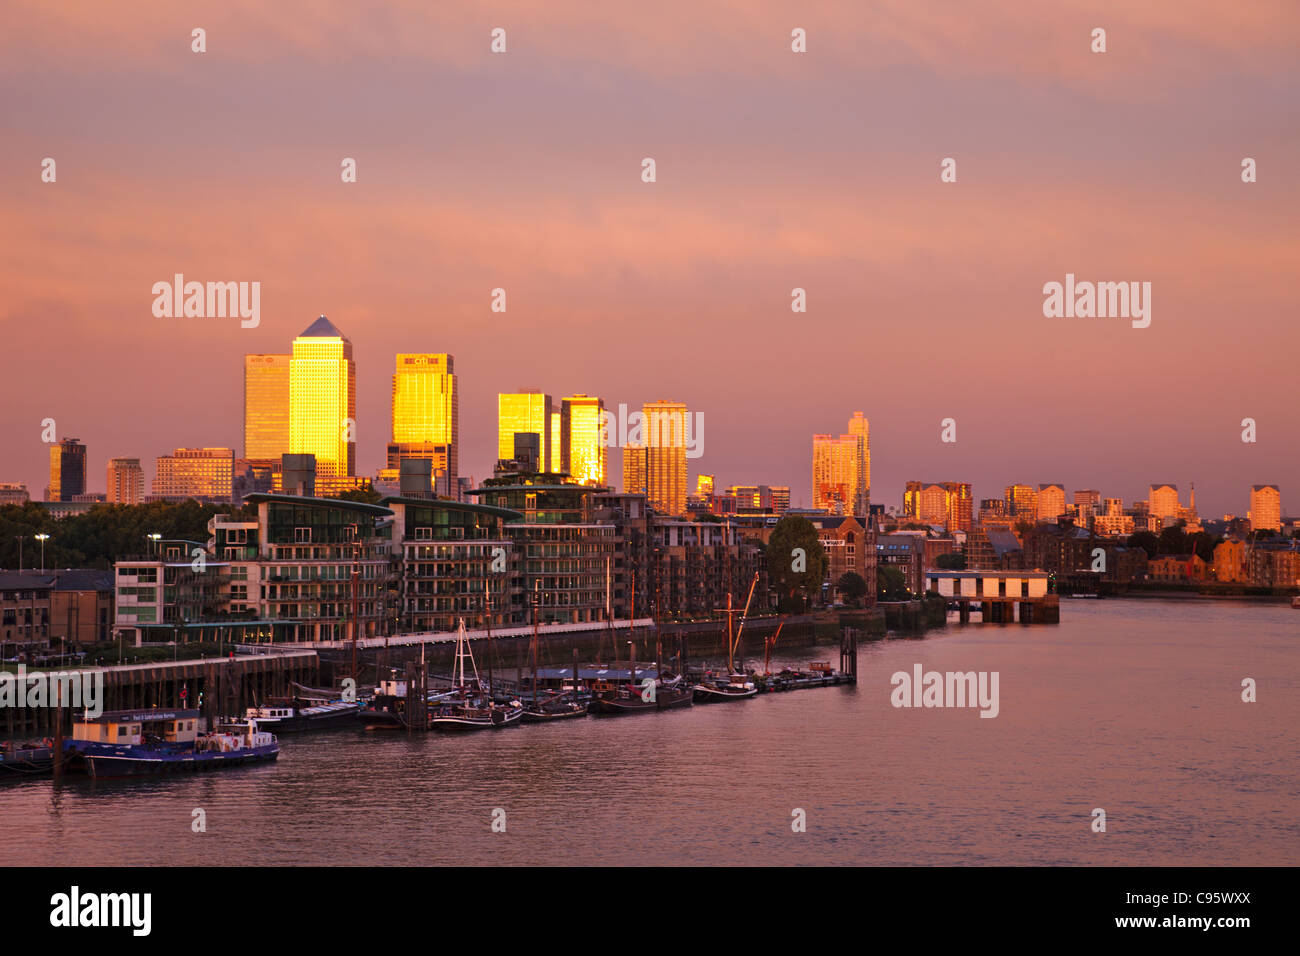 England, London, Docklands Skyline and River Thames Stock Photo